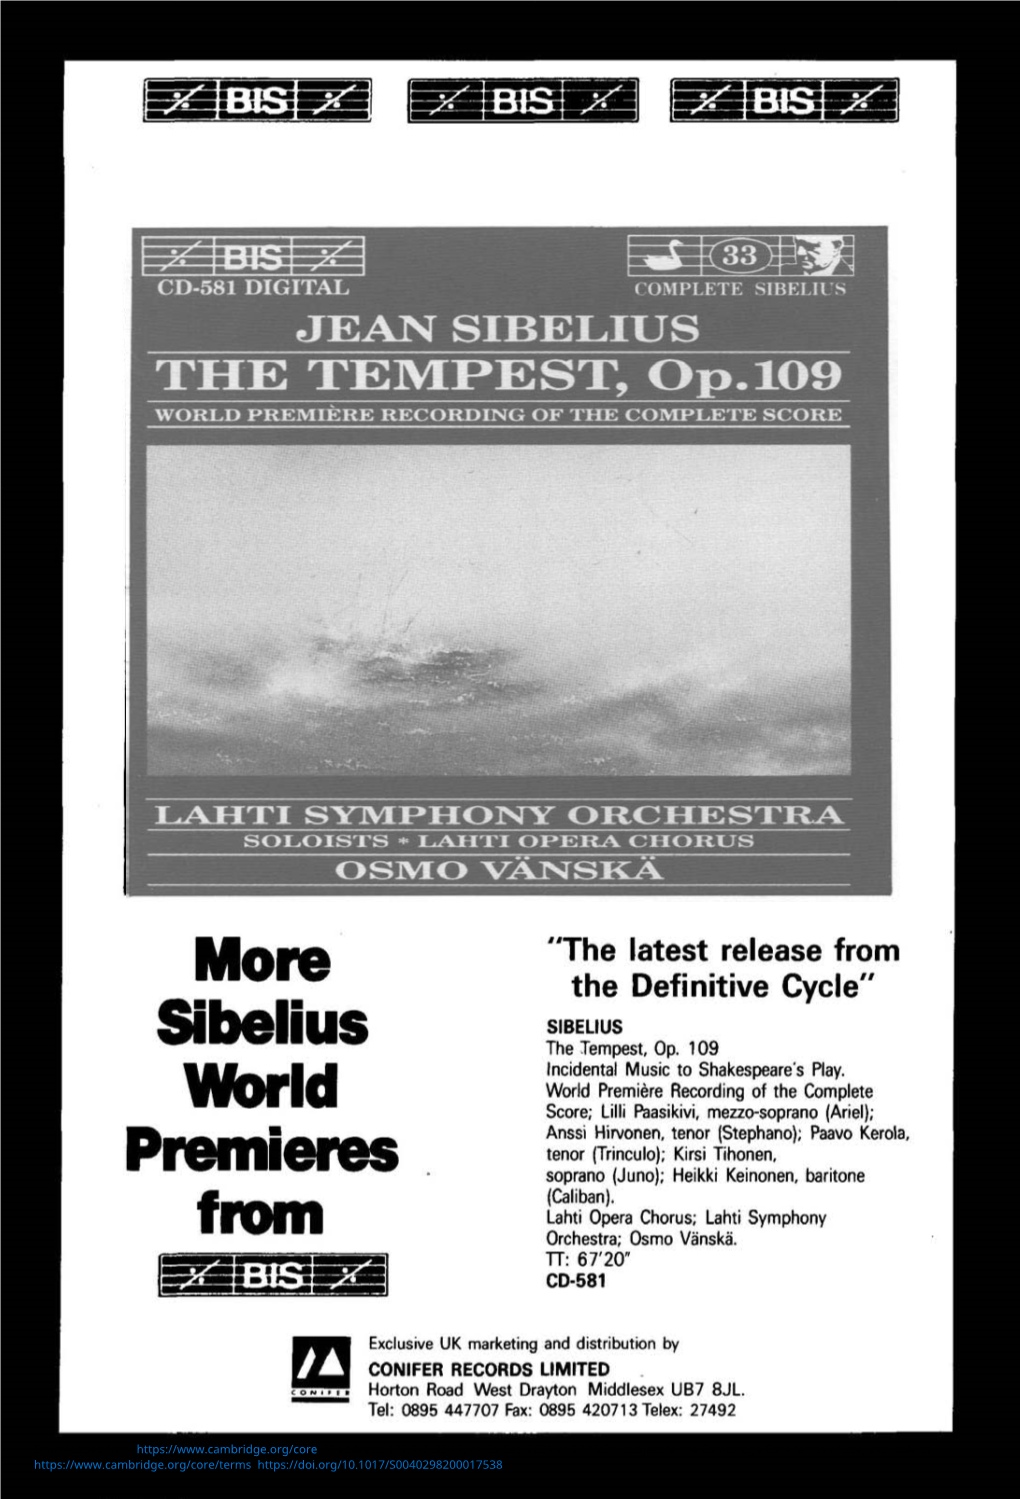 Mm More Sibelius World Premieres From